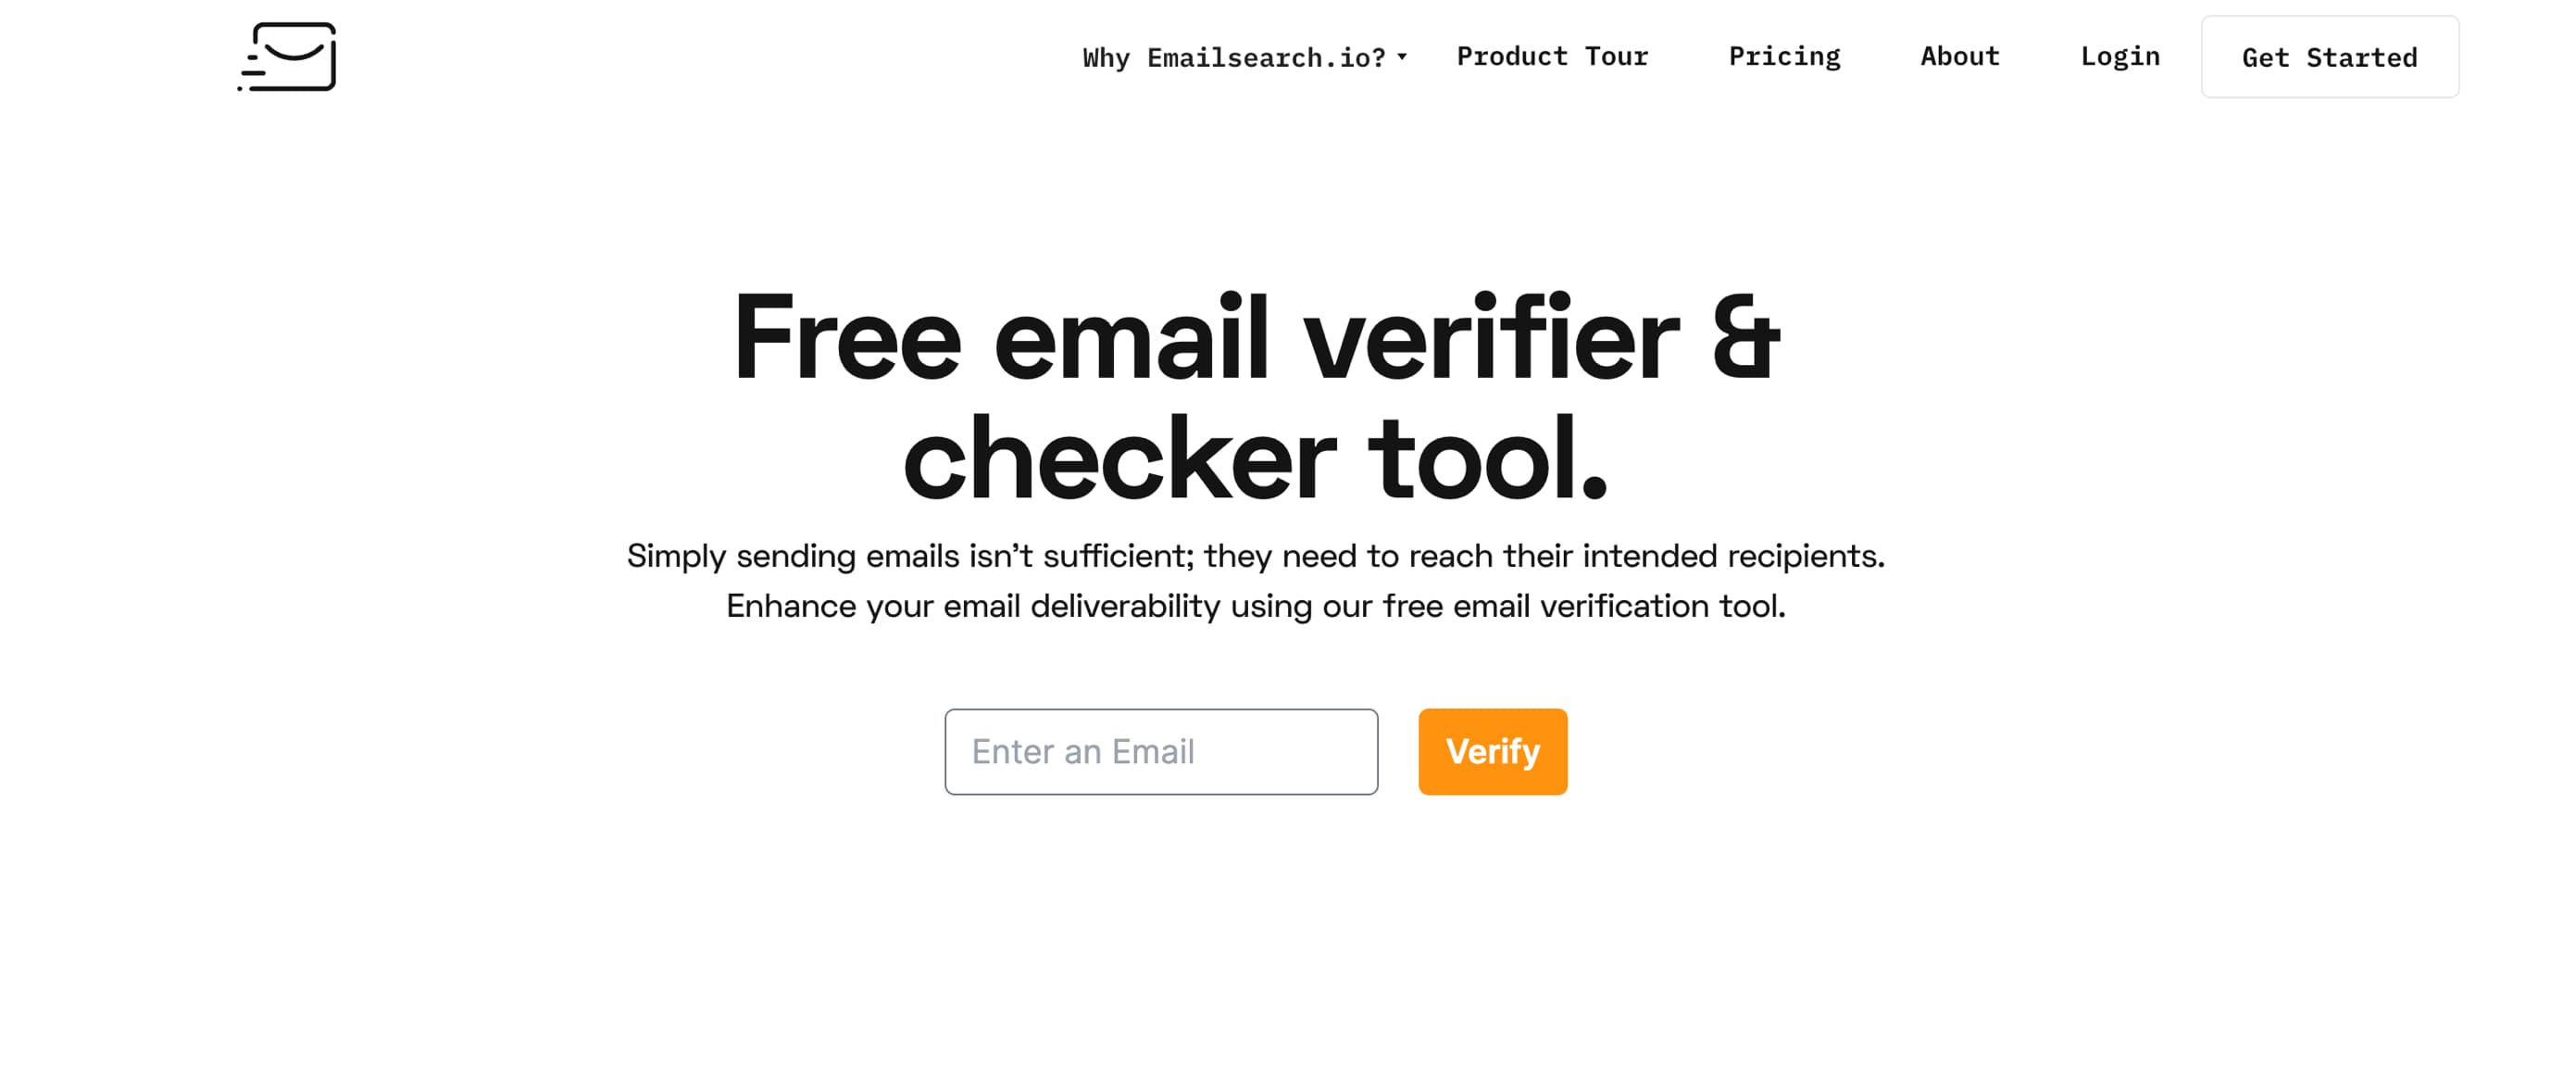 emailsearch-free-email-verifier-pichi